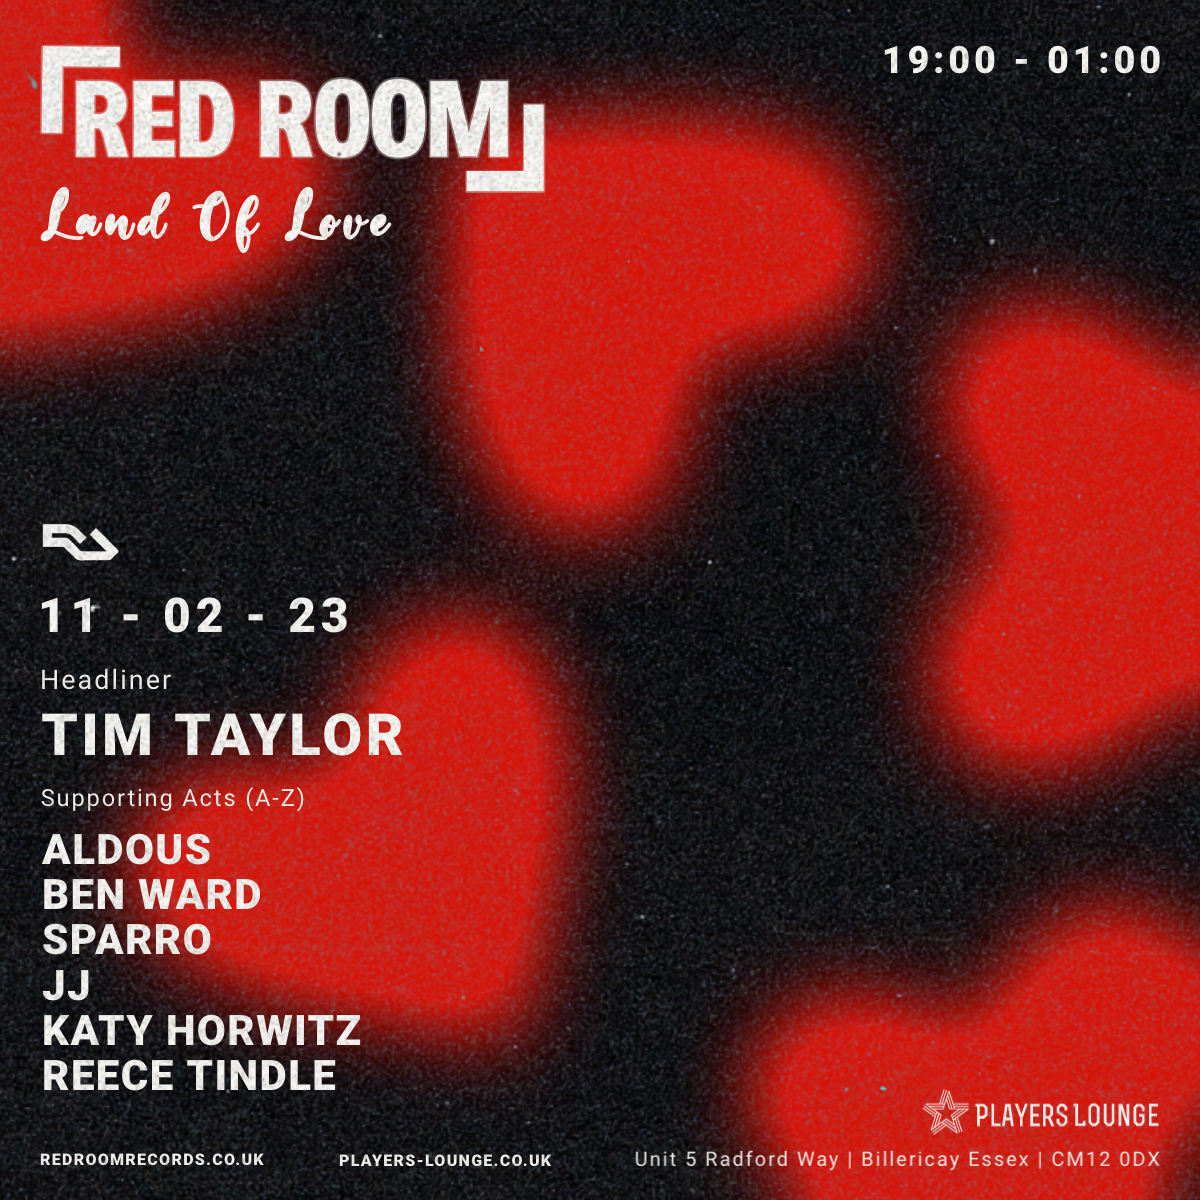 RED ROOM: Land Of Love - フライヤー表